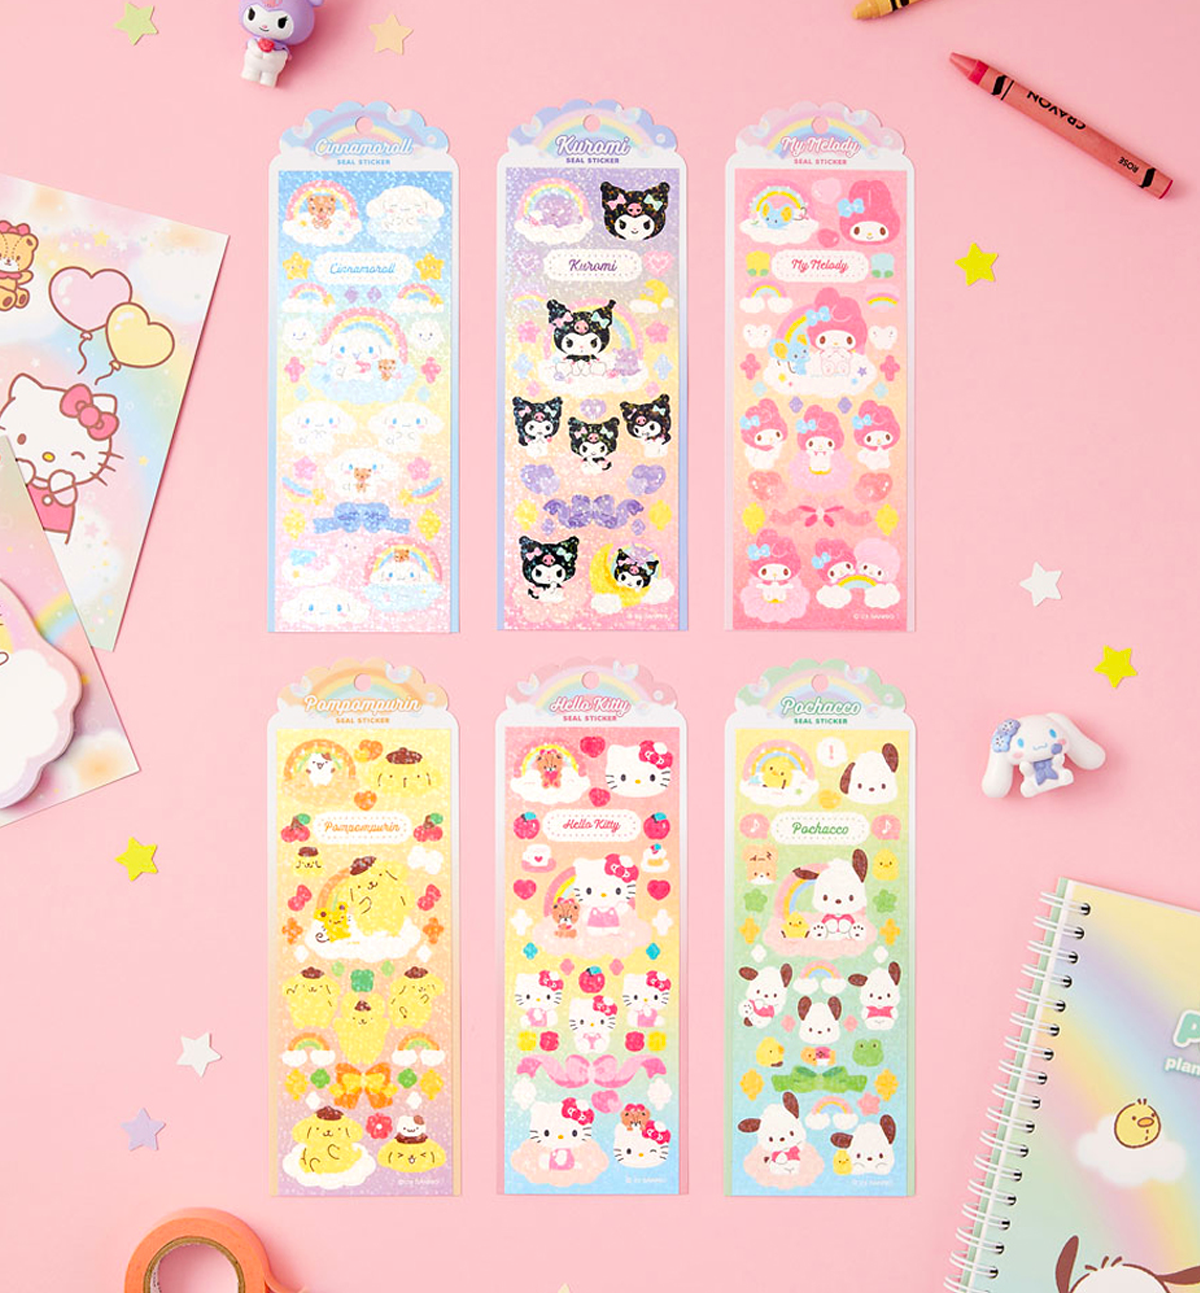 Pink Shimmer Stickers 4 Sheets Glitter, Sparkling, Japanese Stationery,  Kawaii Stickers, Cute Stickers, Cute Stationary, Cute Stationery 